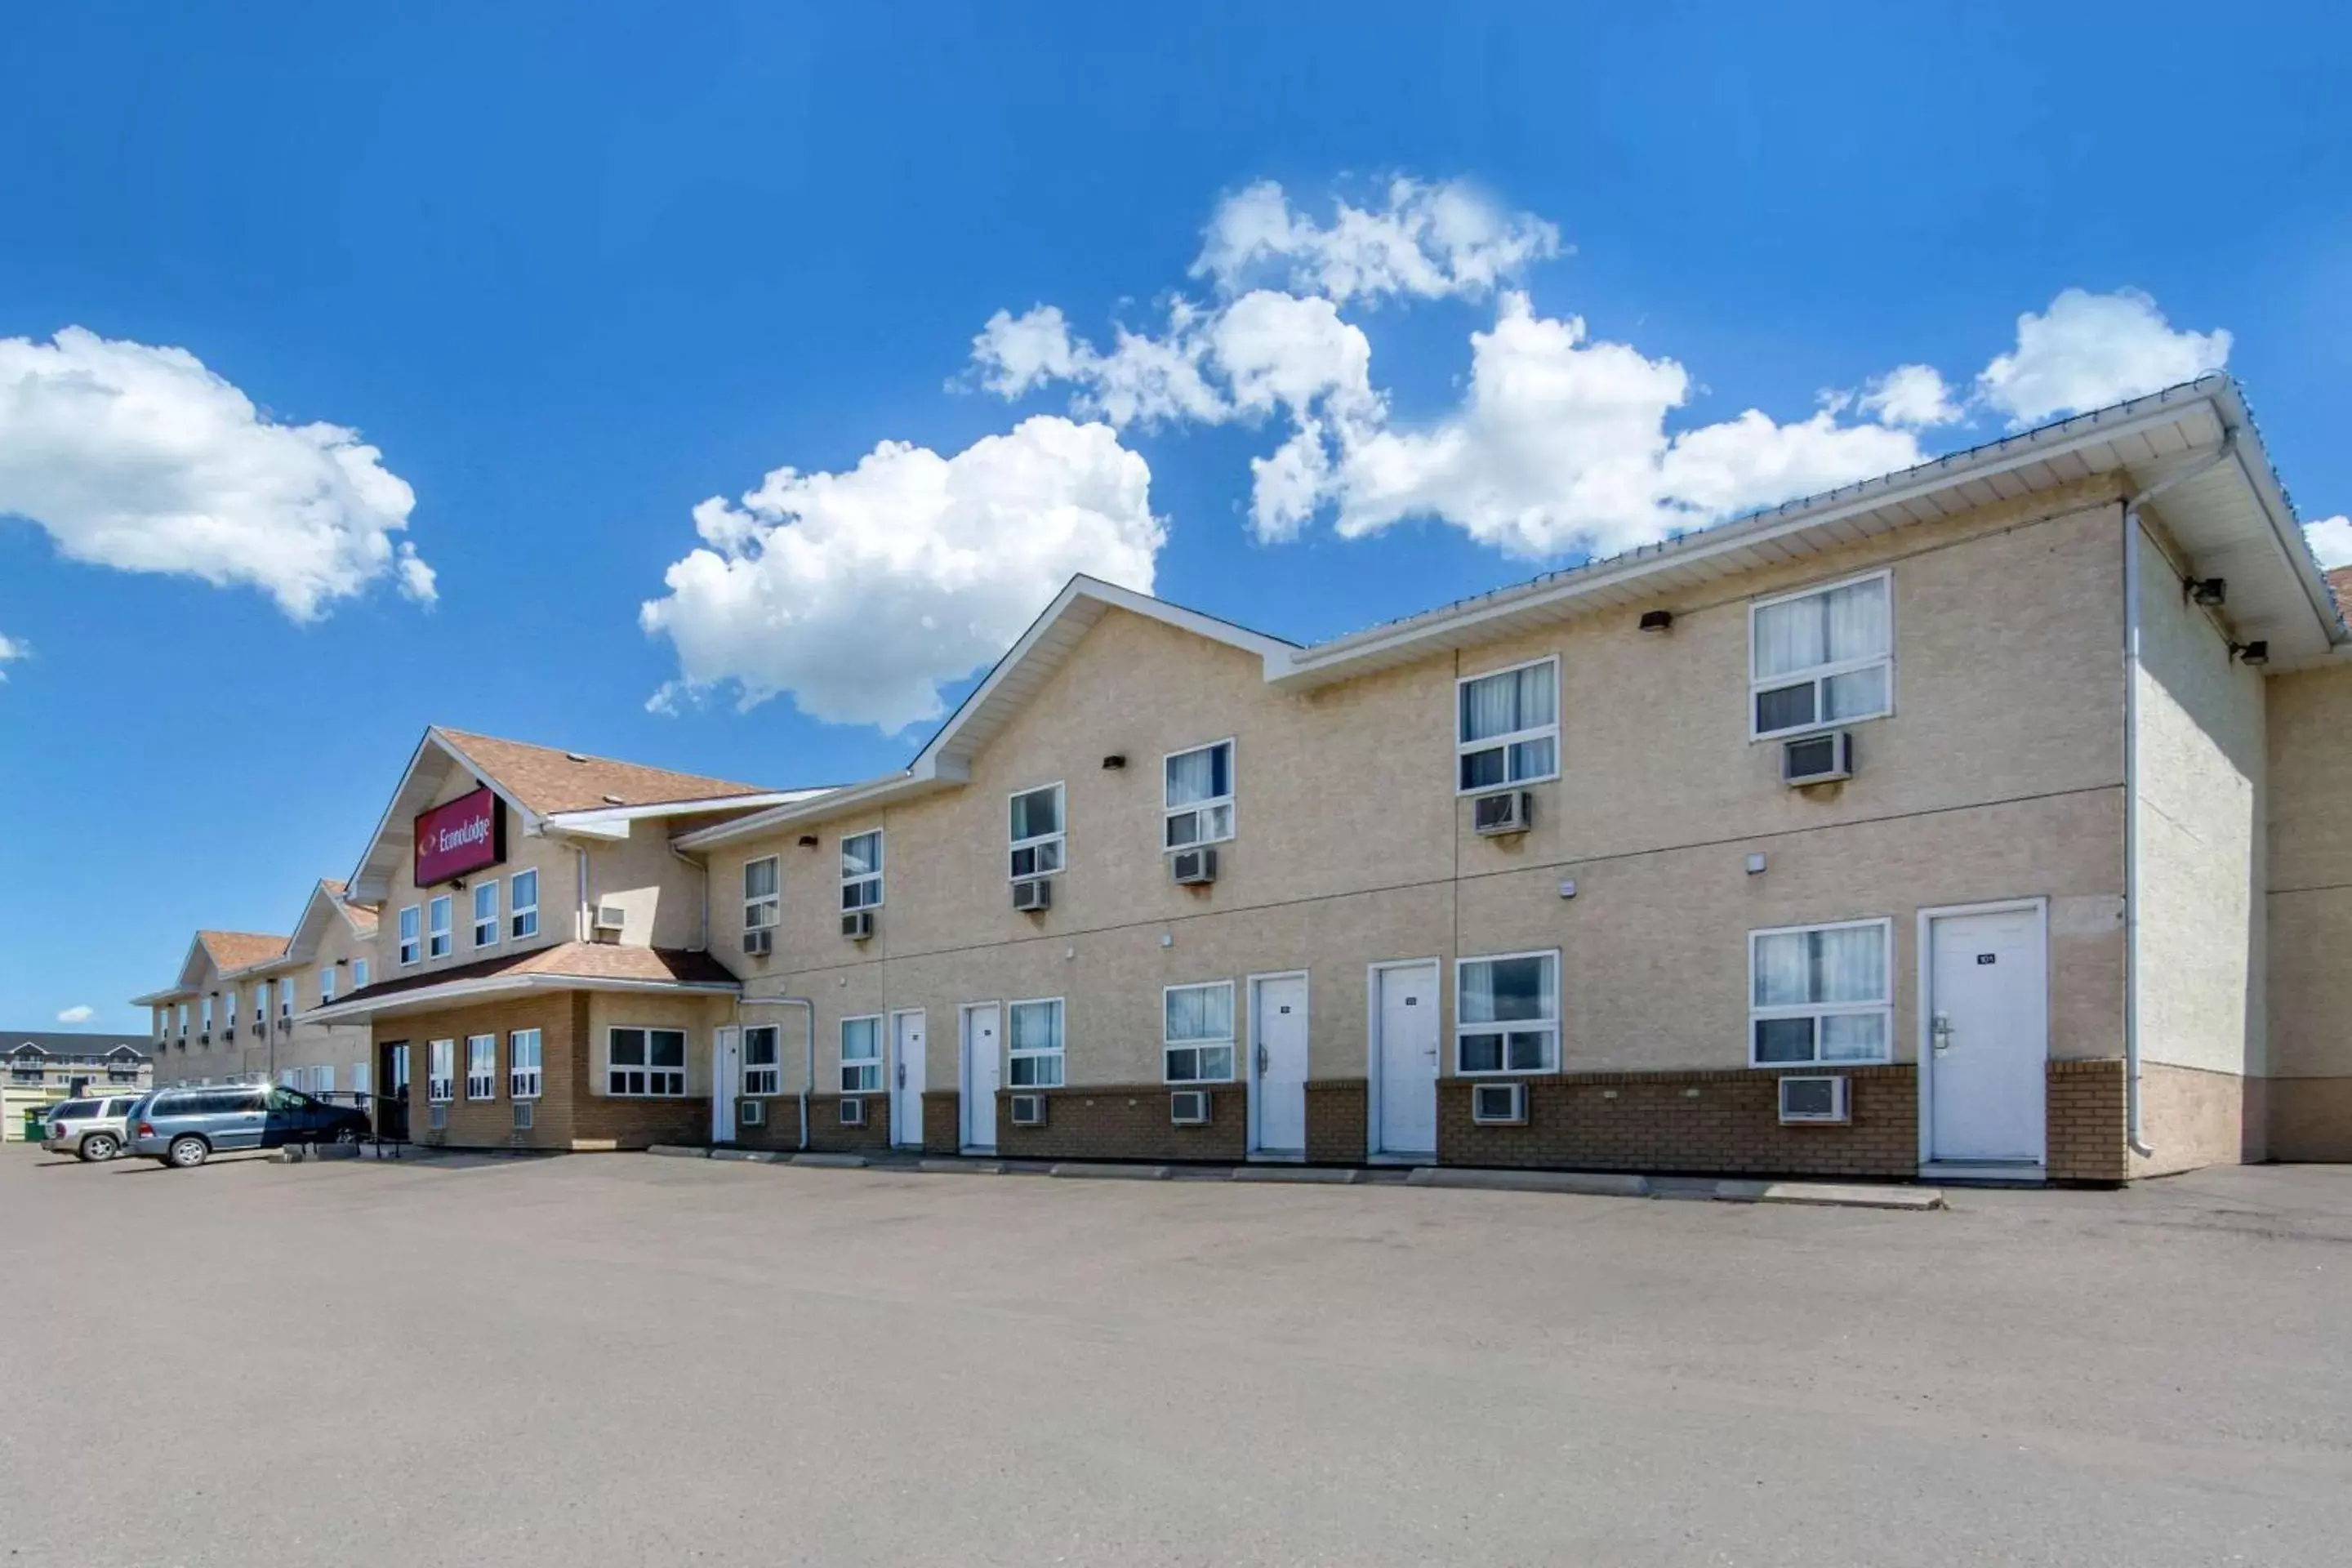 Property Building in Econo Lodge